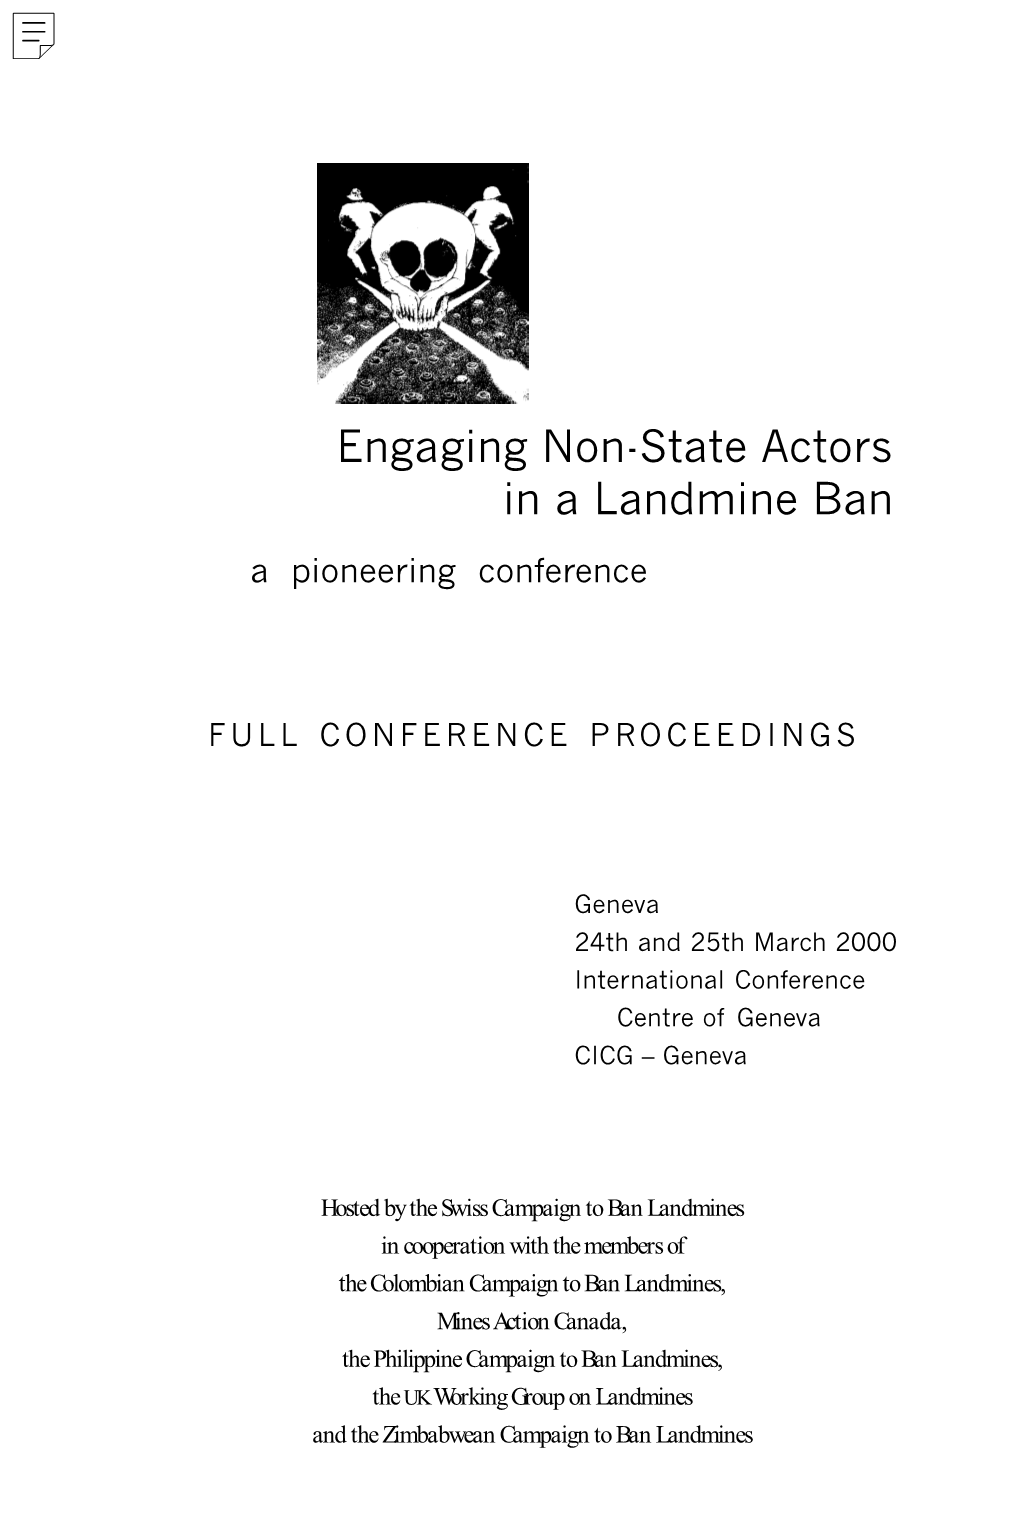 Engaging Non-State Actors in a Landmine Ban a Pioneering Conference